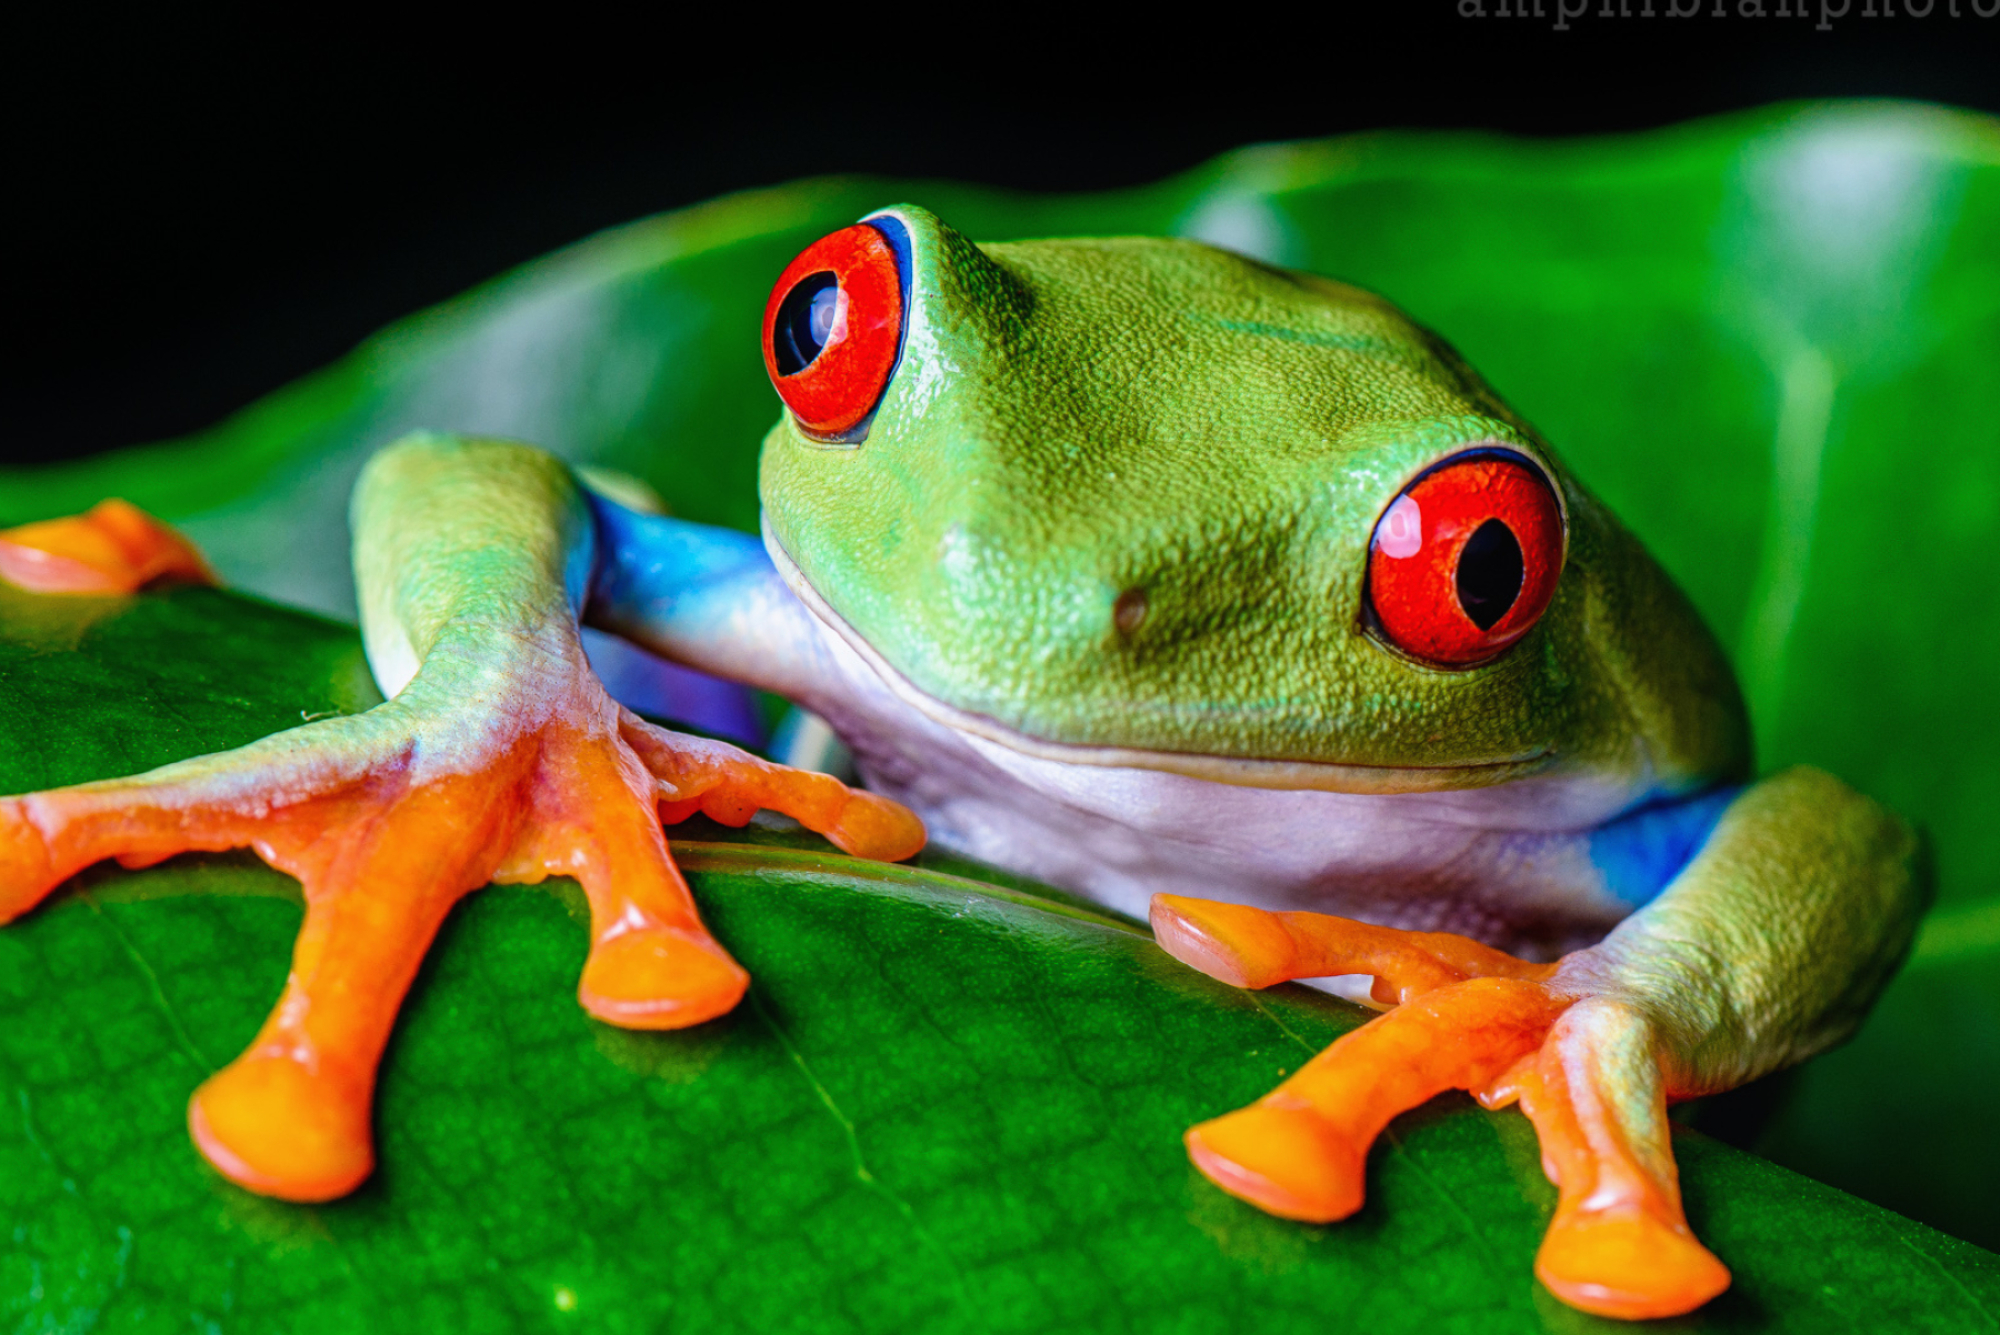 Red-Eyed Tree Frog wallpapers, High-quality images, Stunning photography, 4K resolution, 2000x1340 HD Desktop